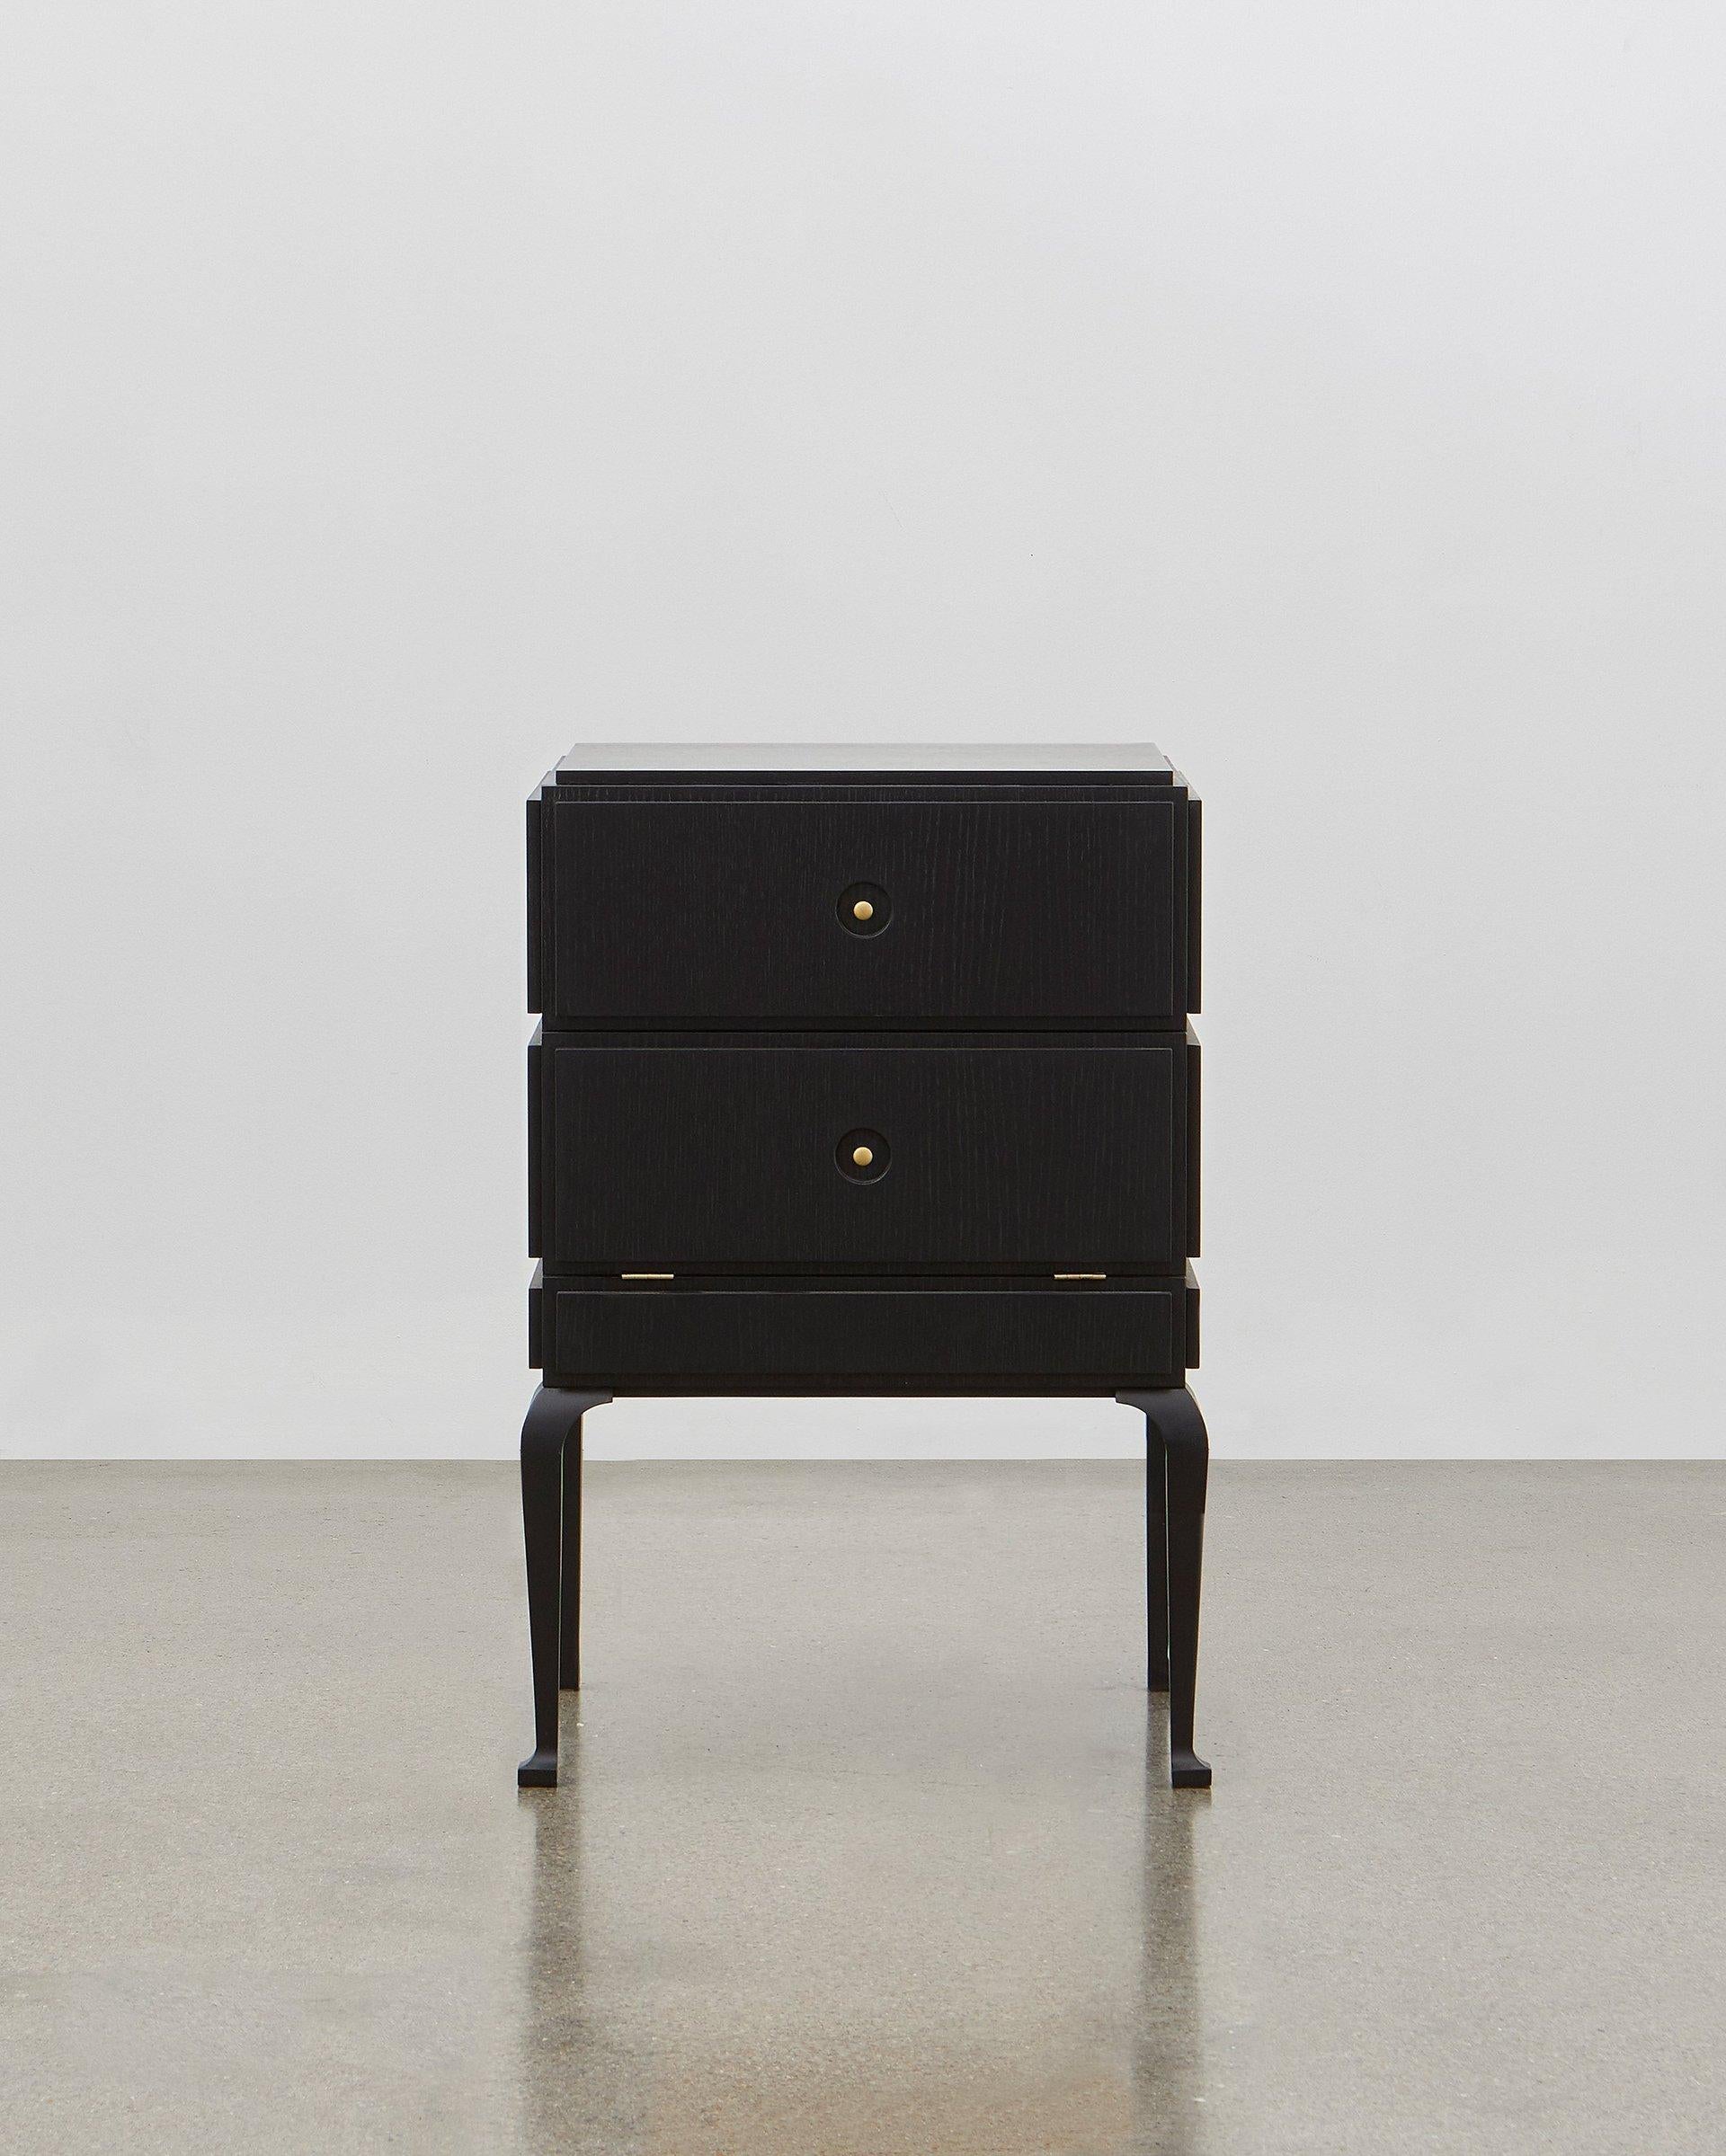 This small but perfectly formed storage piece is made out of wood and can be combined with soft leather on the panels. 

It is elegant and stylish all the way around and from all angles. Poul Henningsen designed this in 1920.

The PH small